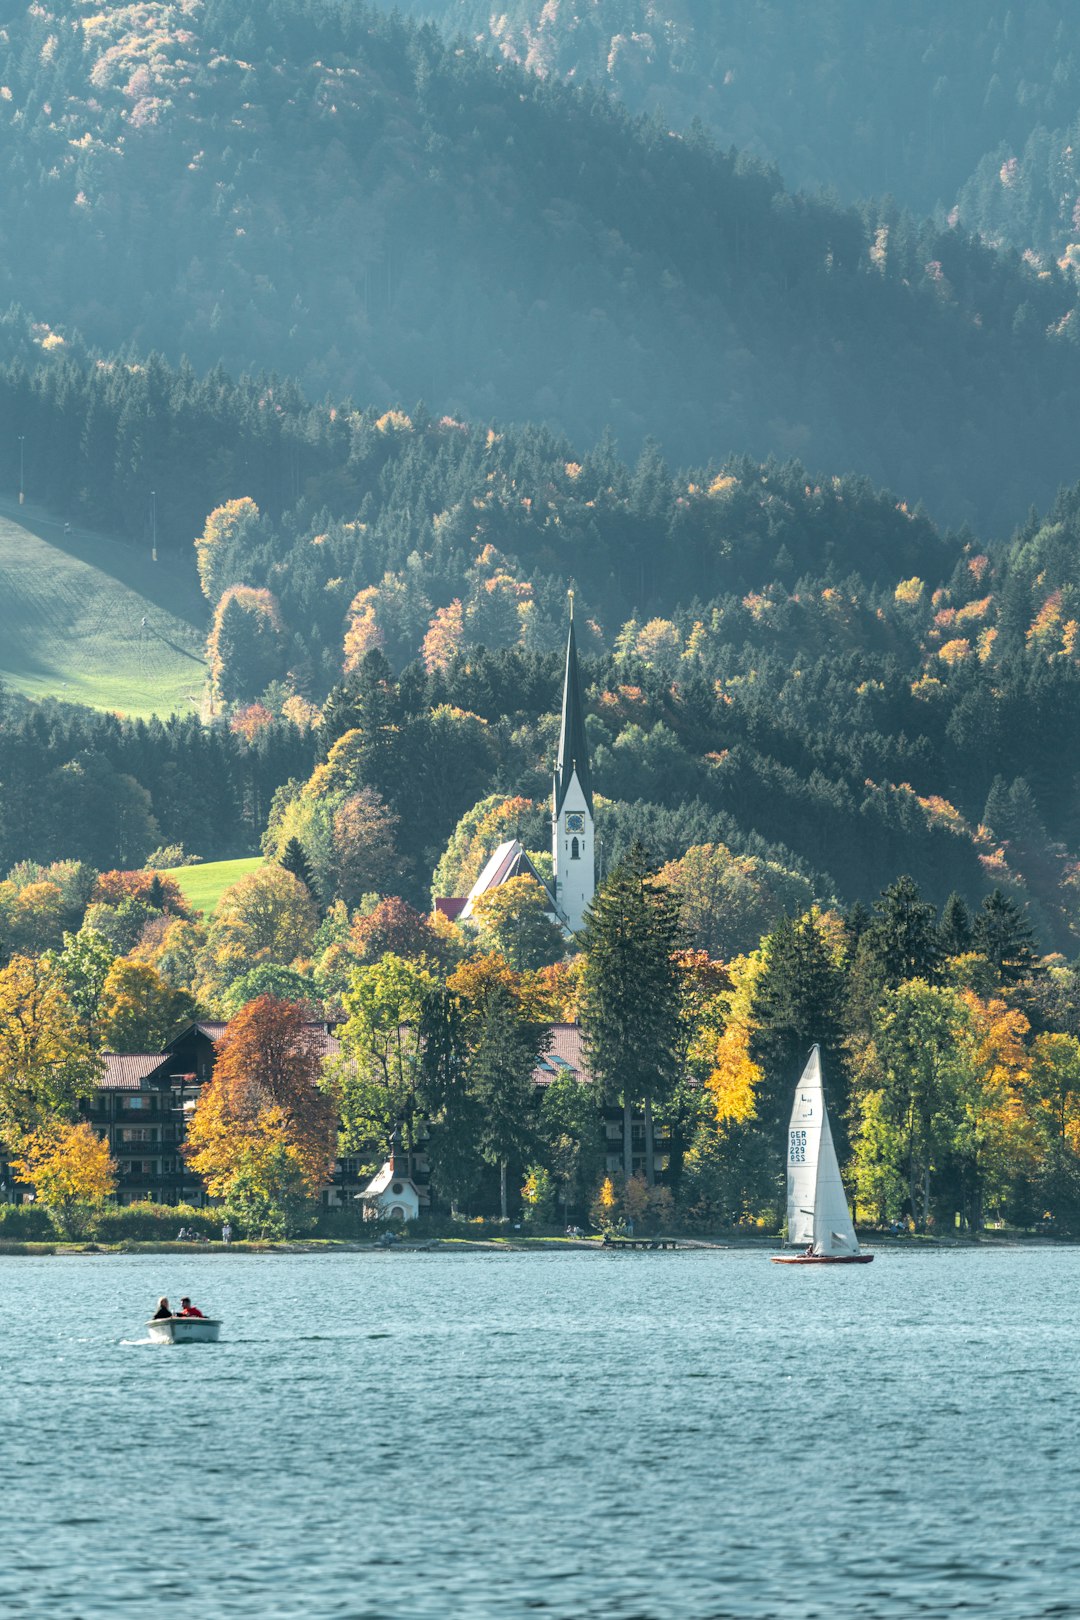 Travel Tips and Stories of Tegernsee in Germany